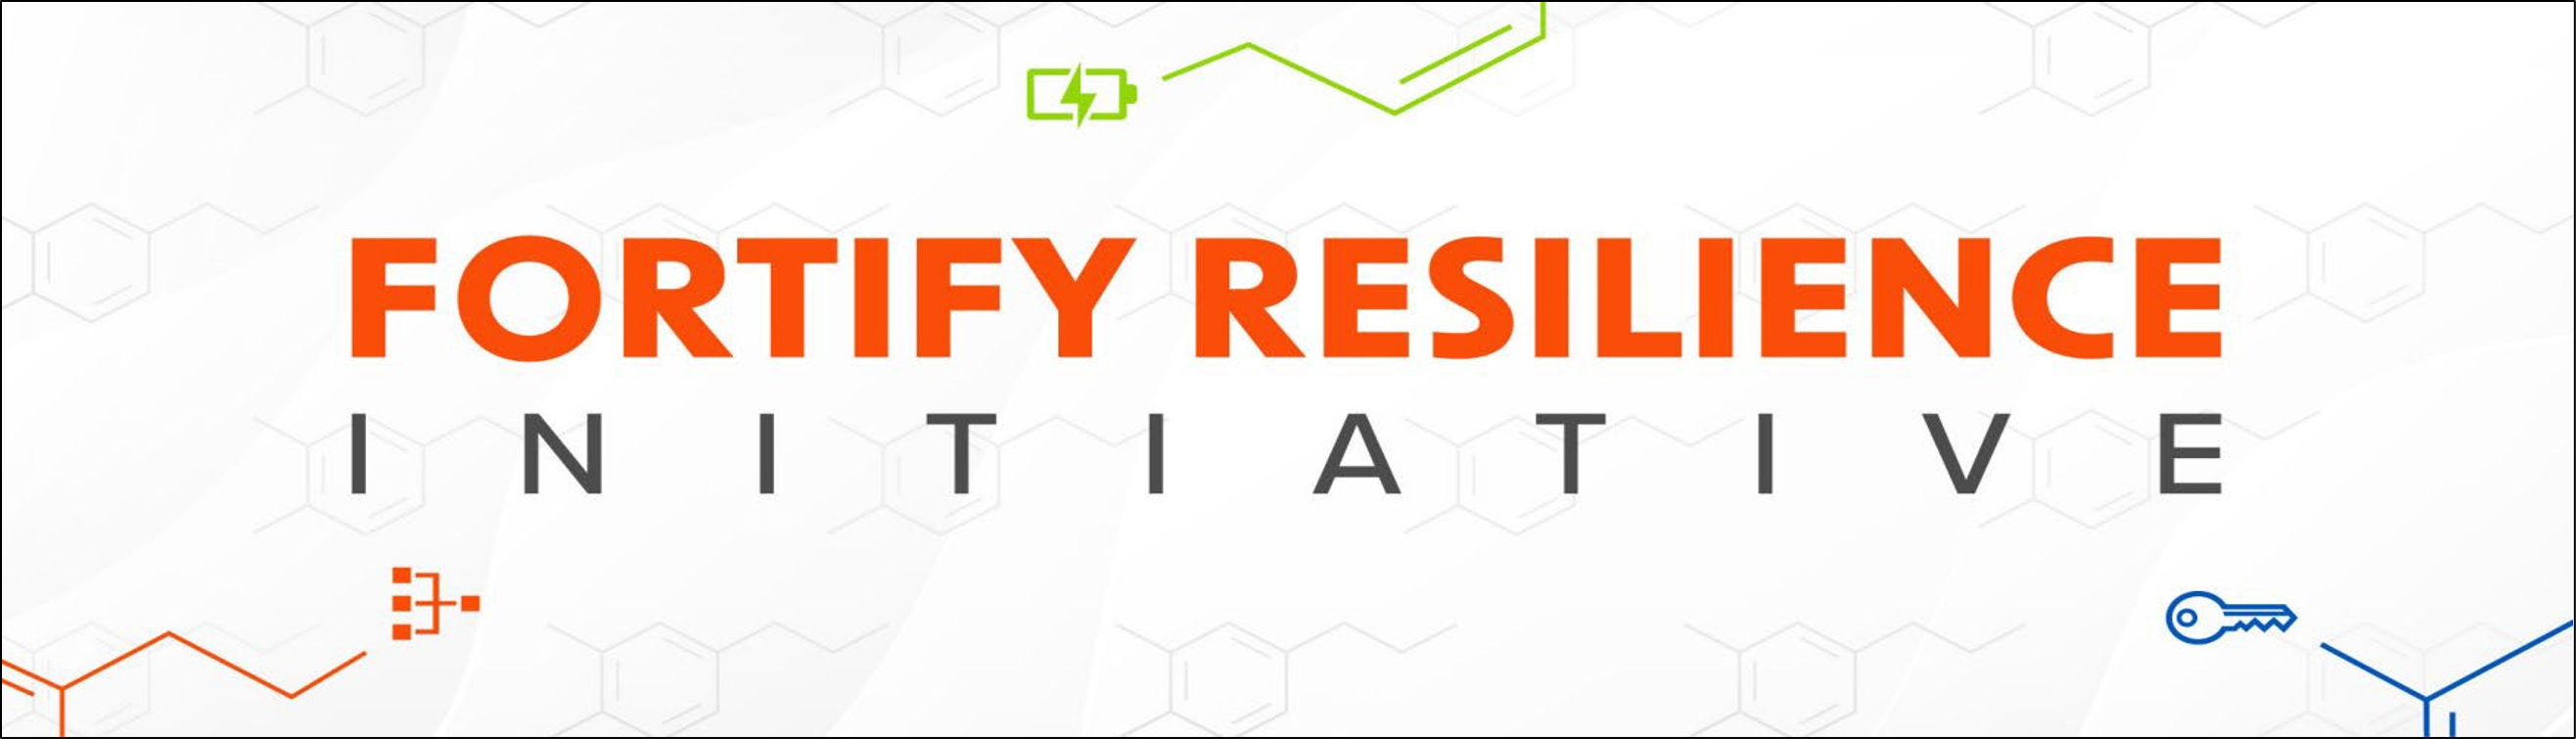 Fortify Resilience Initiative Banner